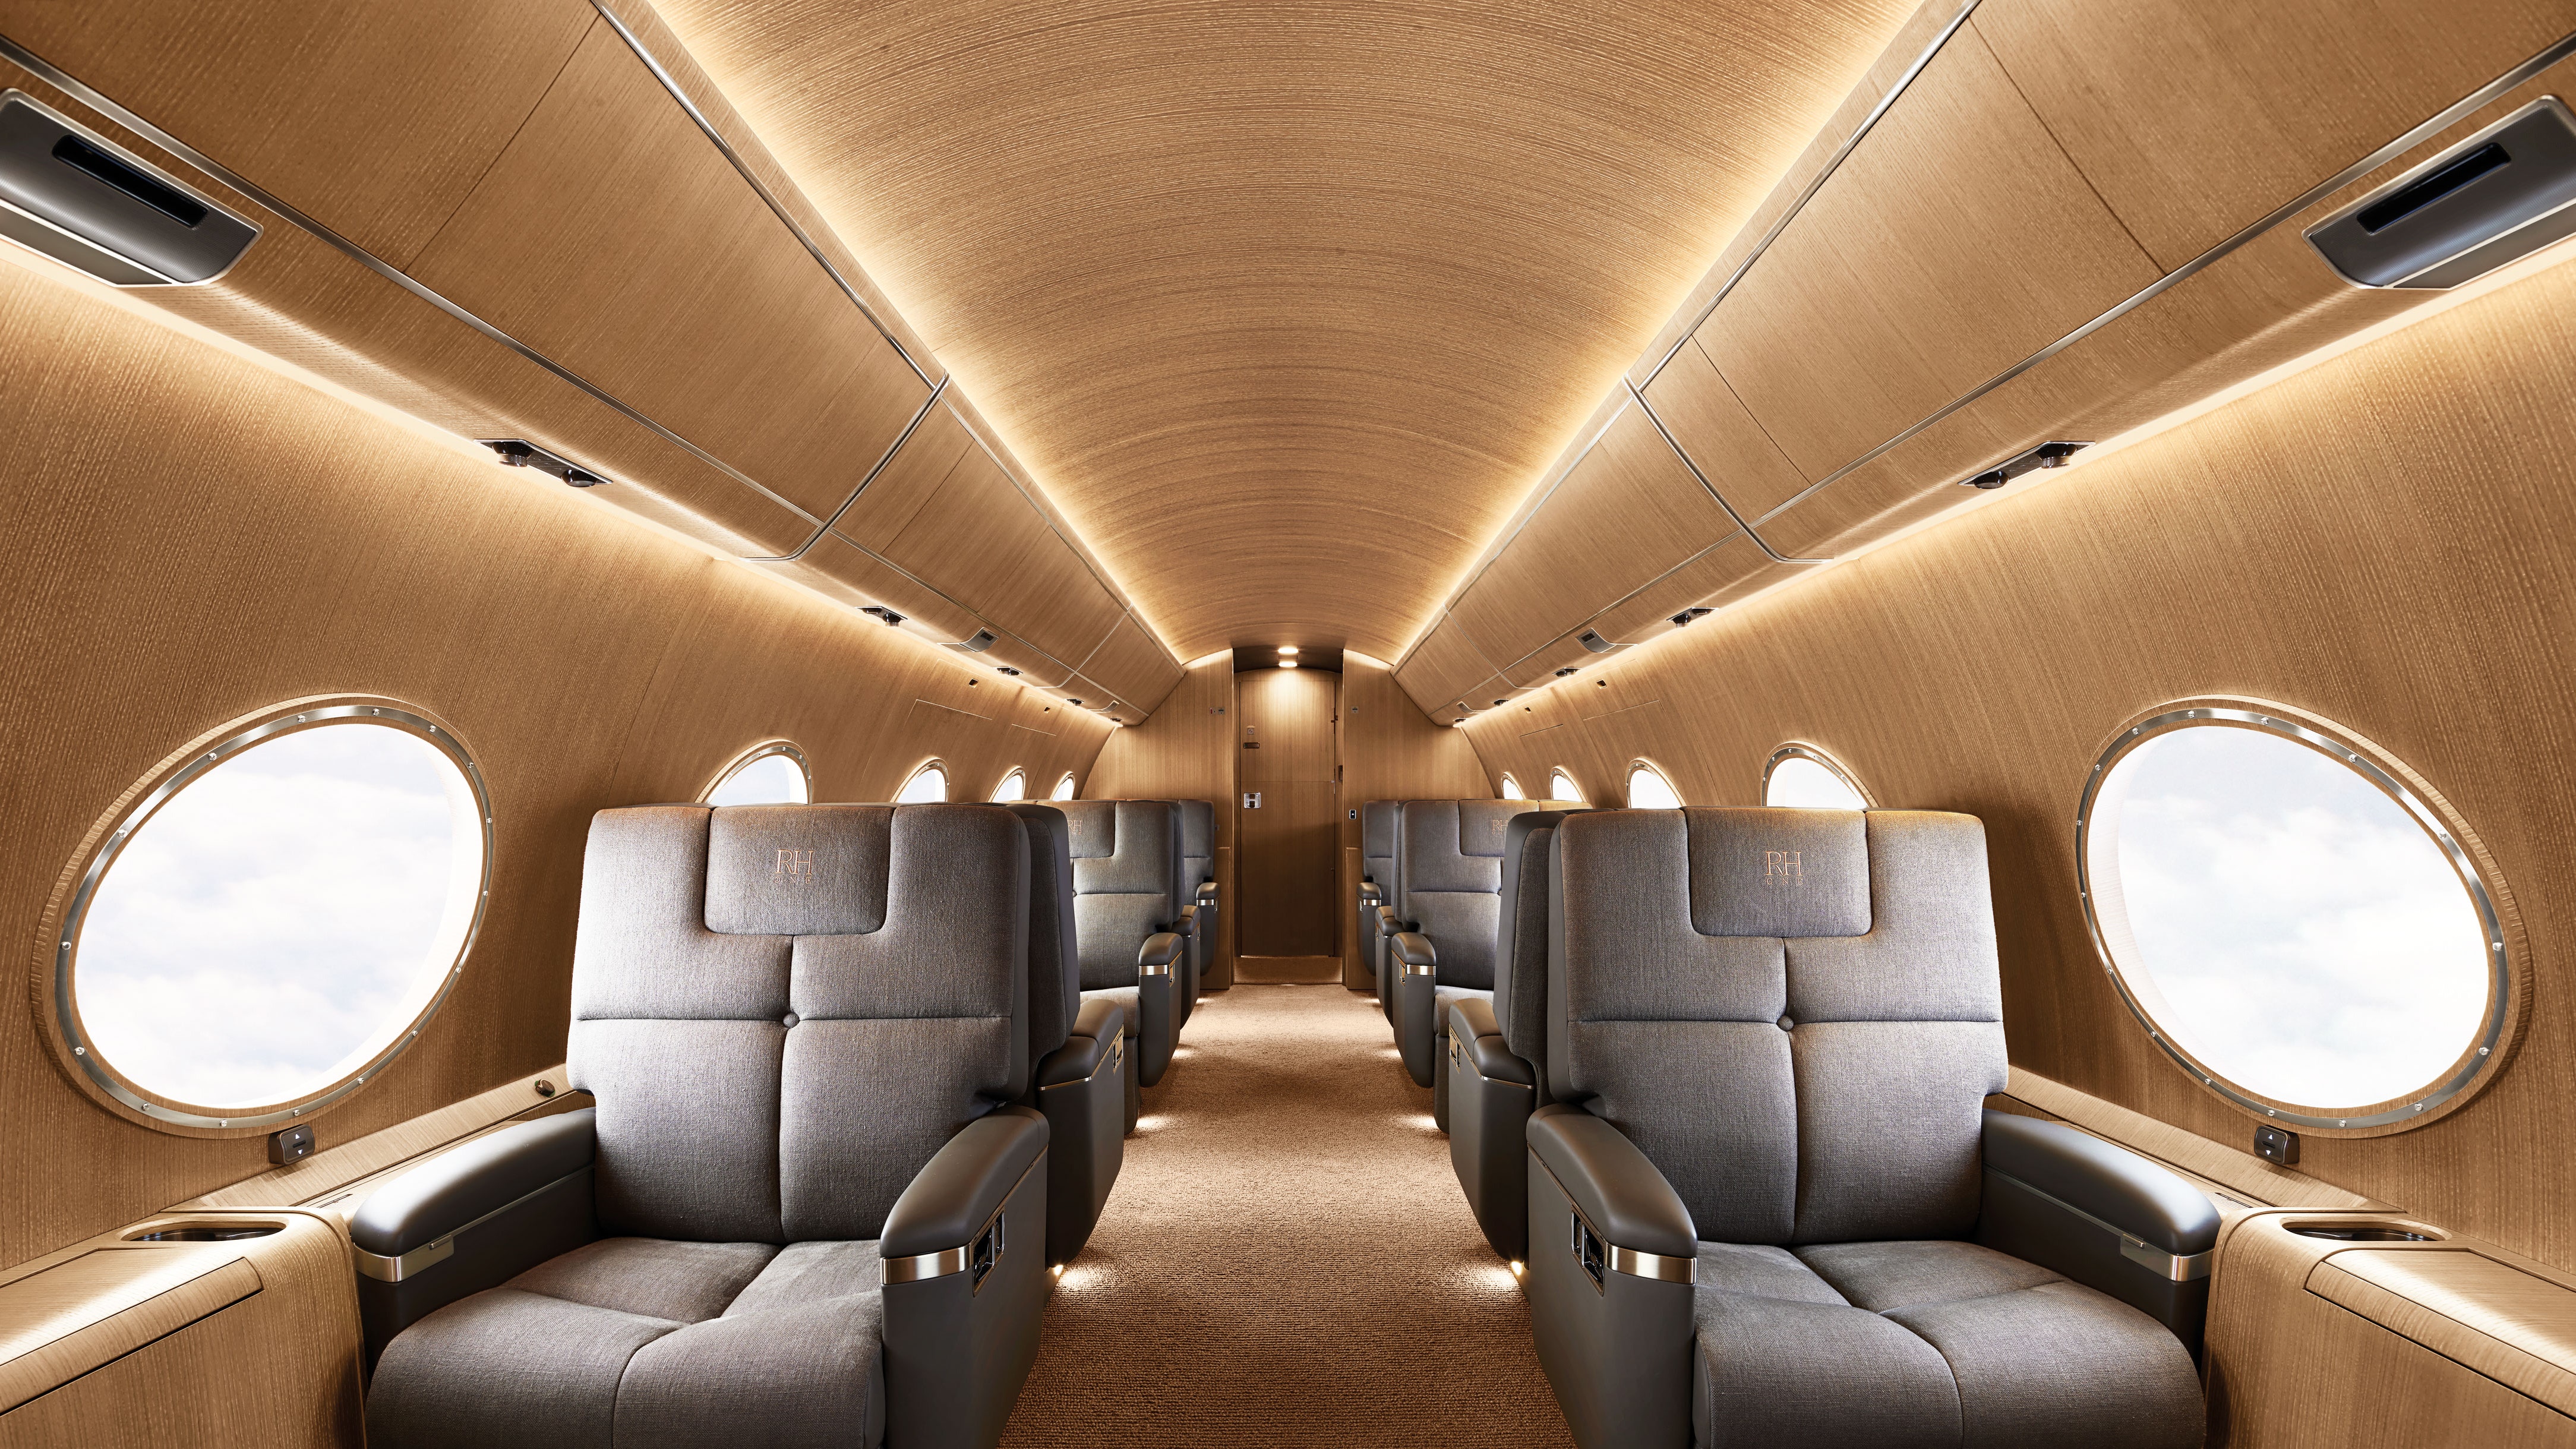 An Inside Look at RH's First Private Charter Jet